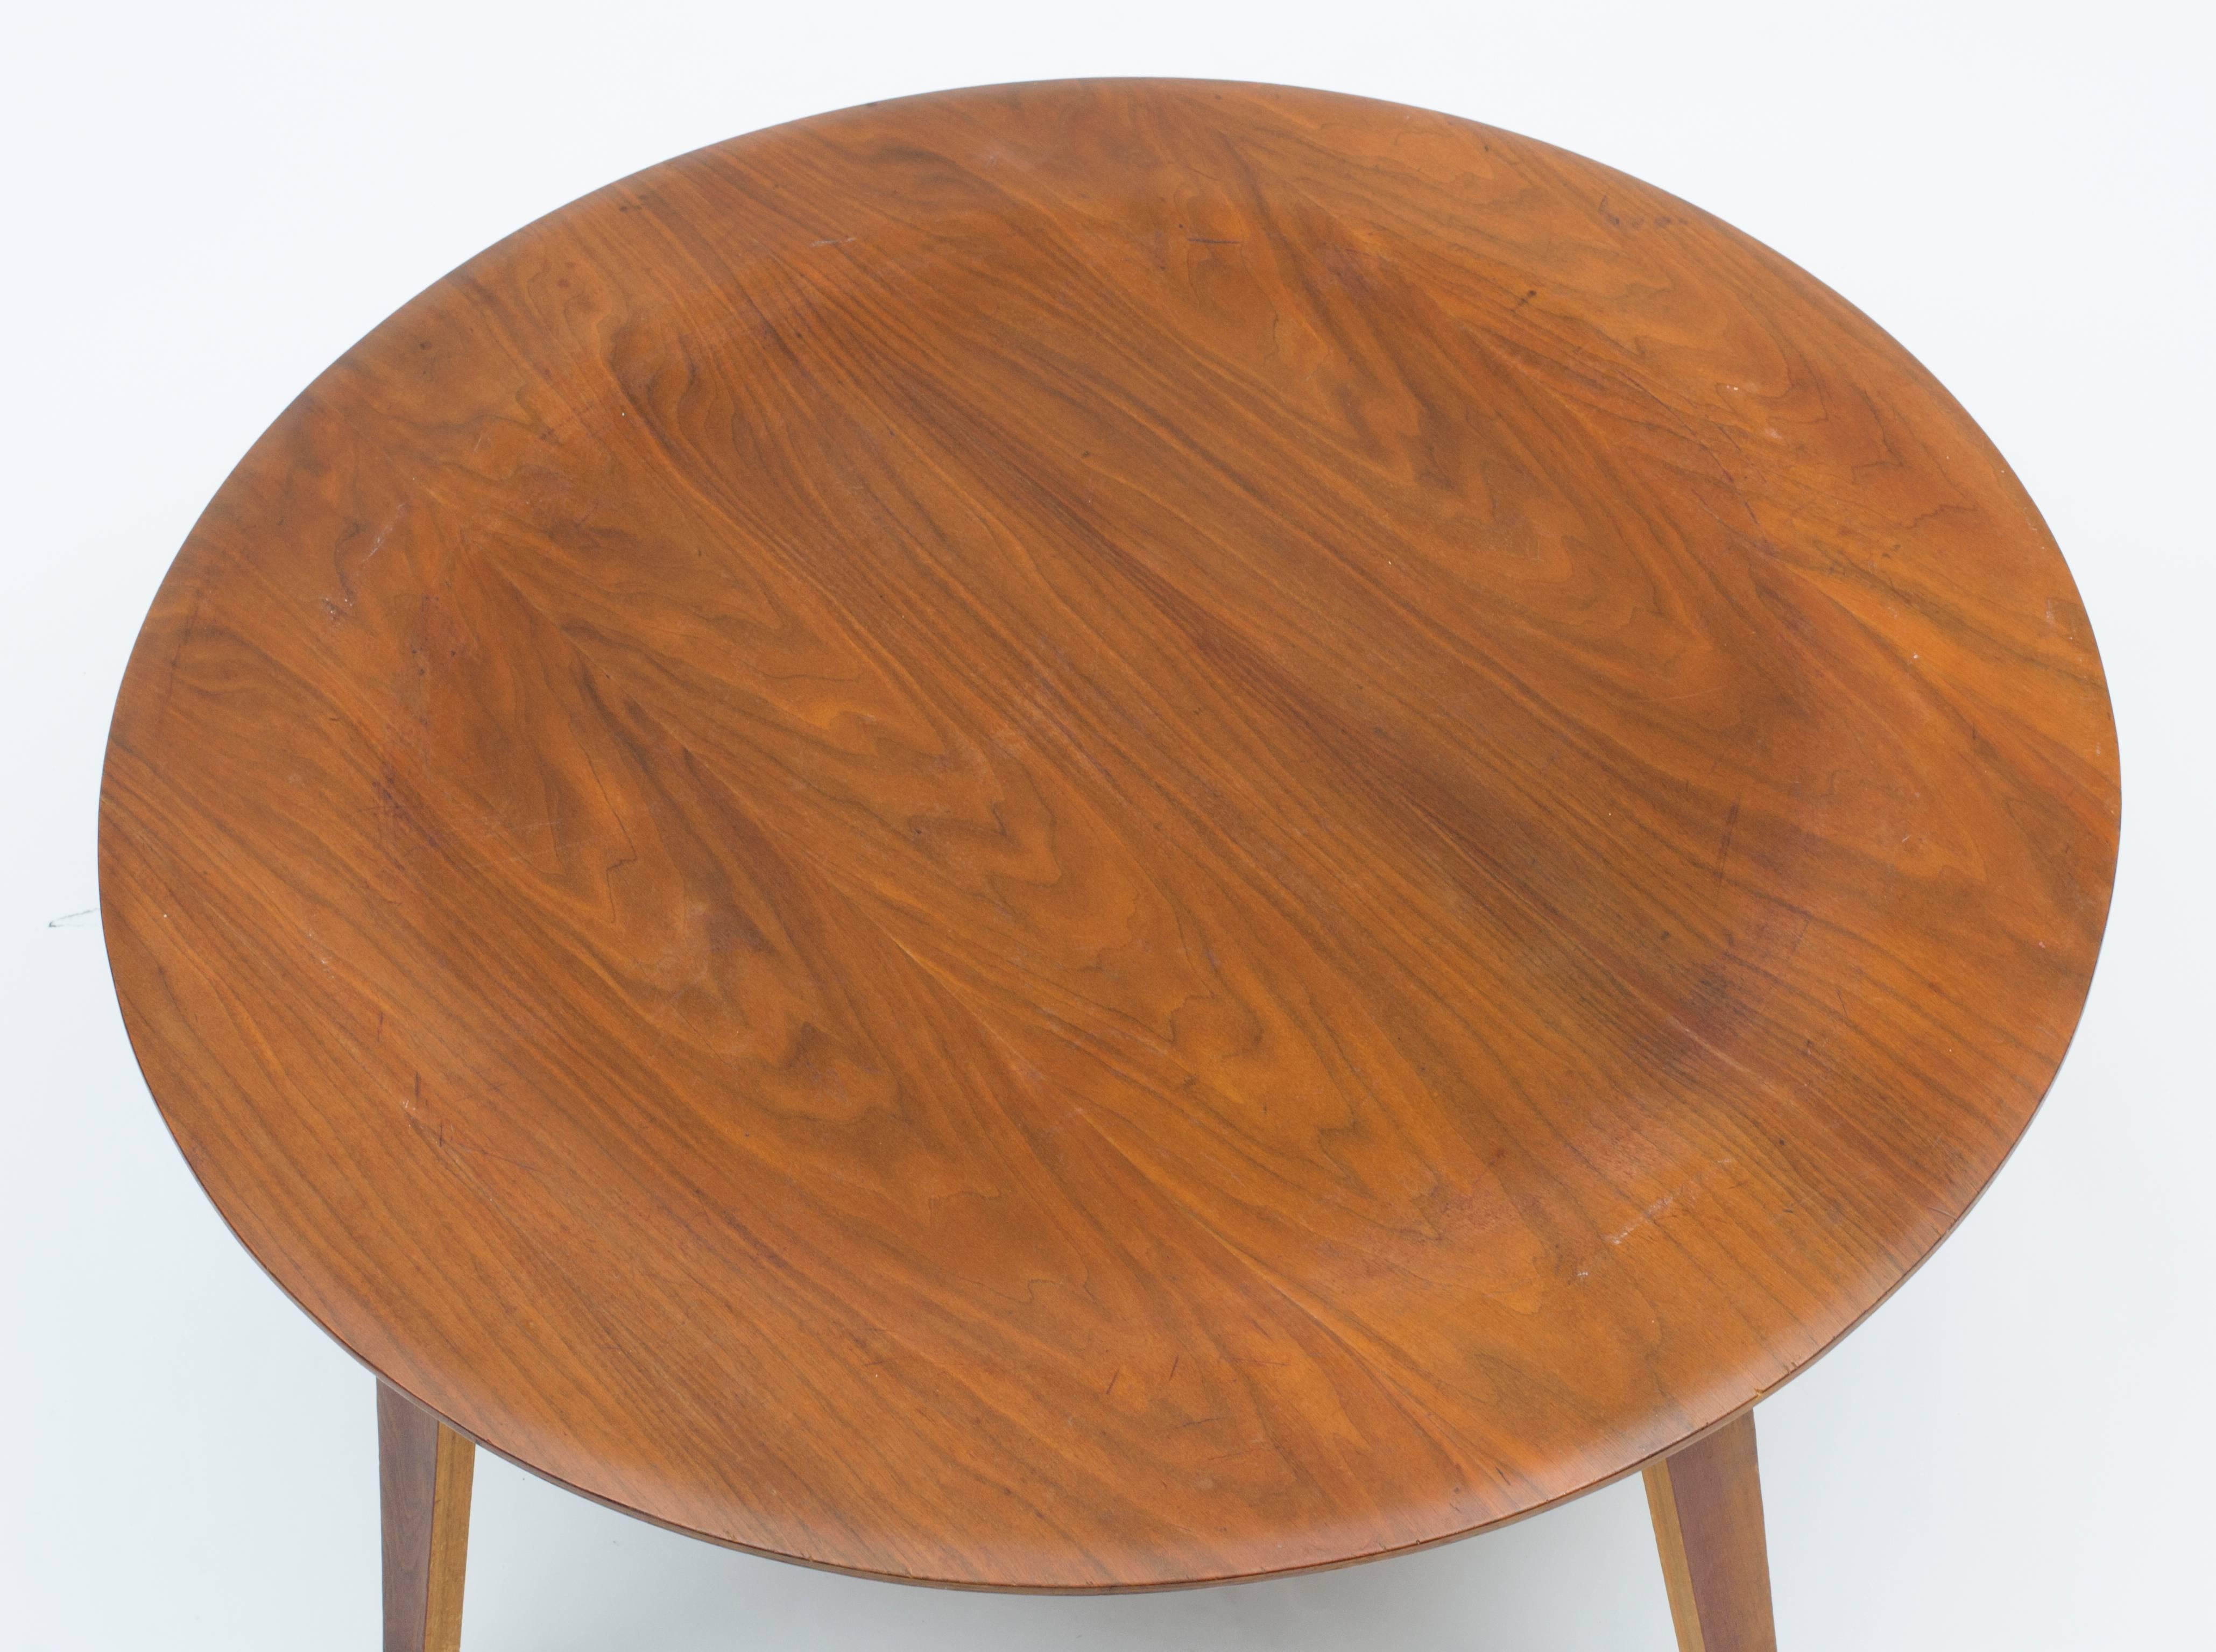 Early example of the iconic molded plywood table designed by Charles Eames, manufactured by Evans Products and distributed by Herman Miller. The walnut top features a beautiful grain. All original finish, retaining natural patina. Full label as